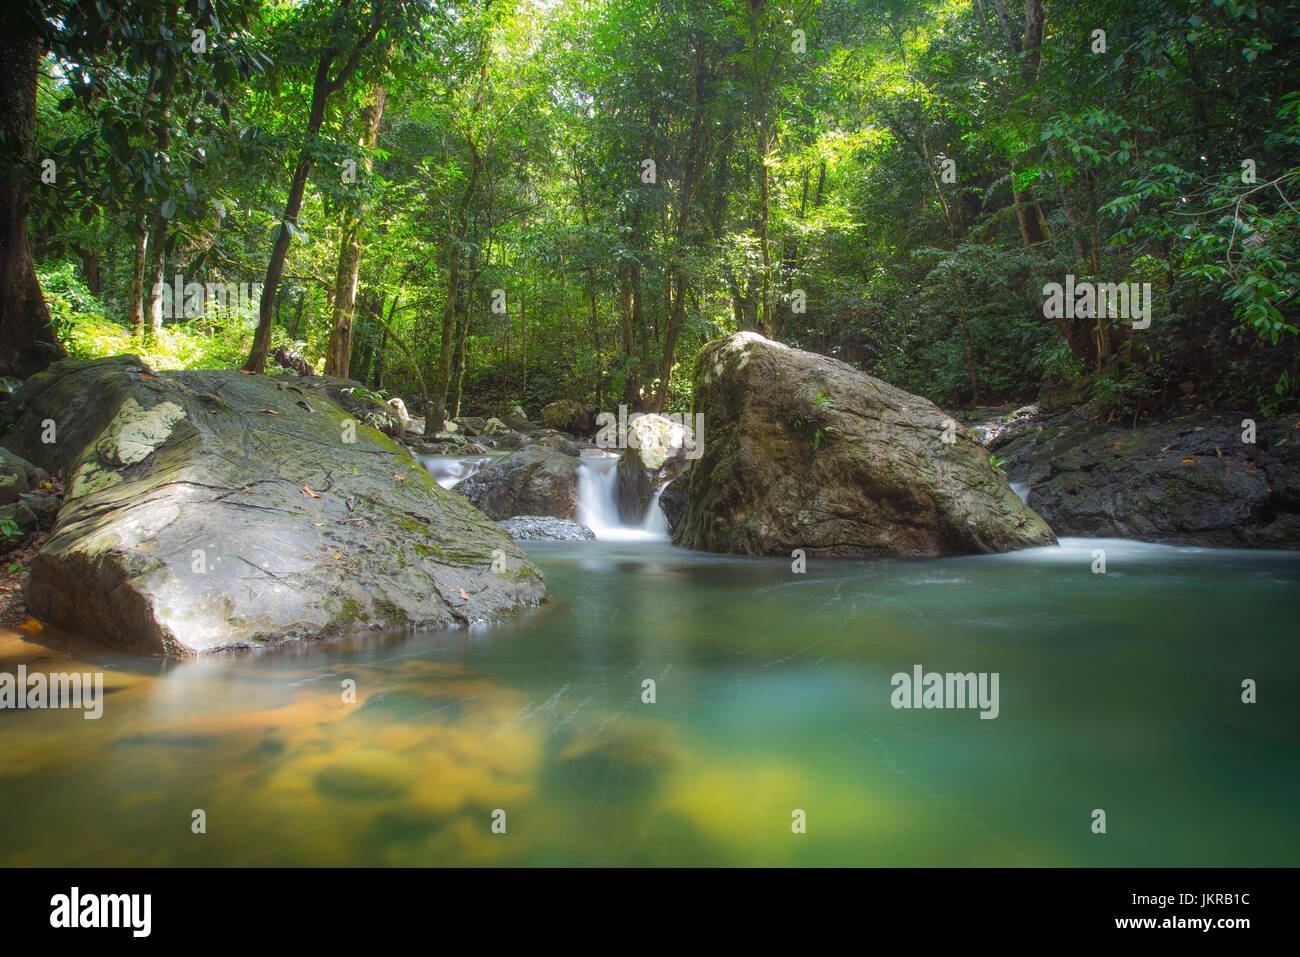 Summer time riverside fresh water surrounded by green forestry. Sarawak, Malaysia. Stock Photo